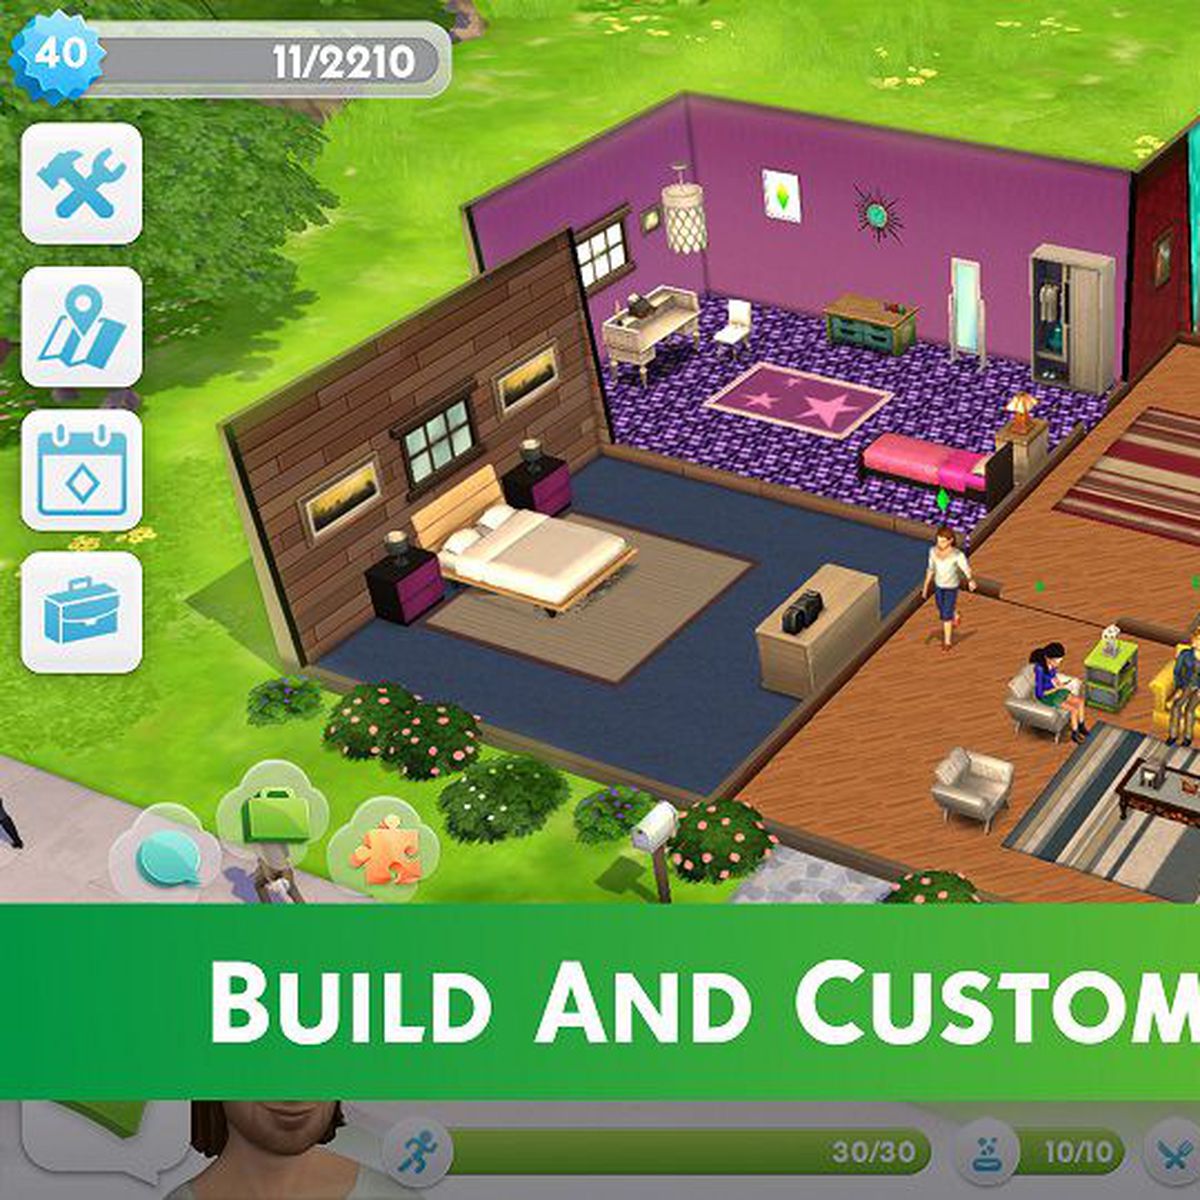 The Sims Mobile: Release Date, Price & Features - Tech Advisor